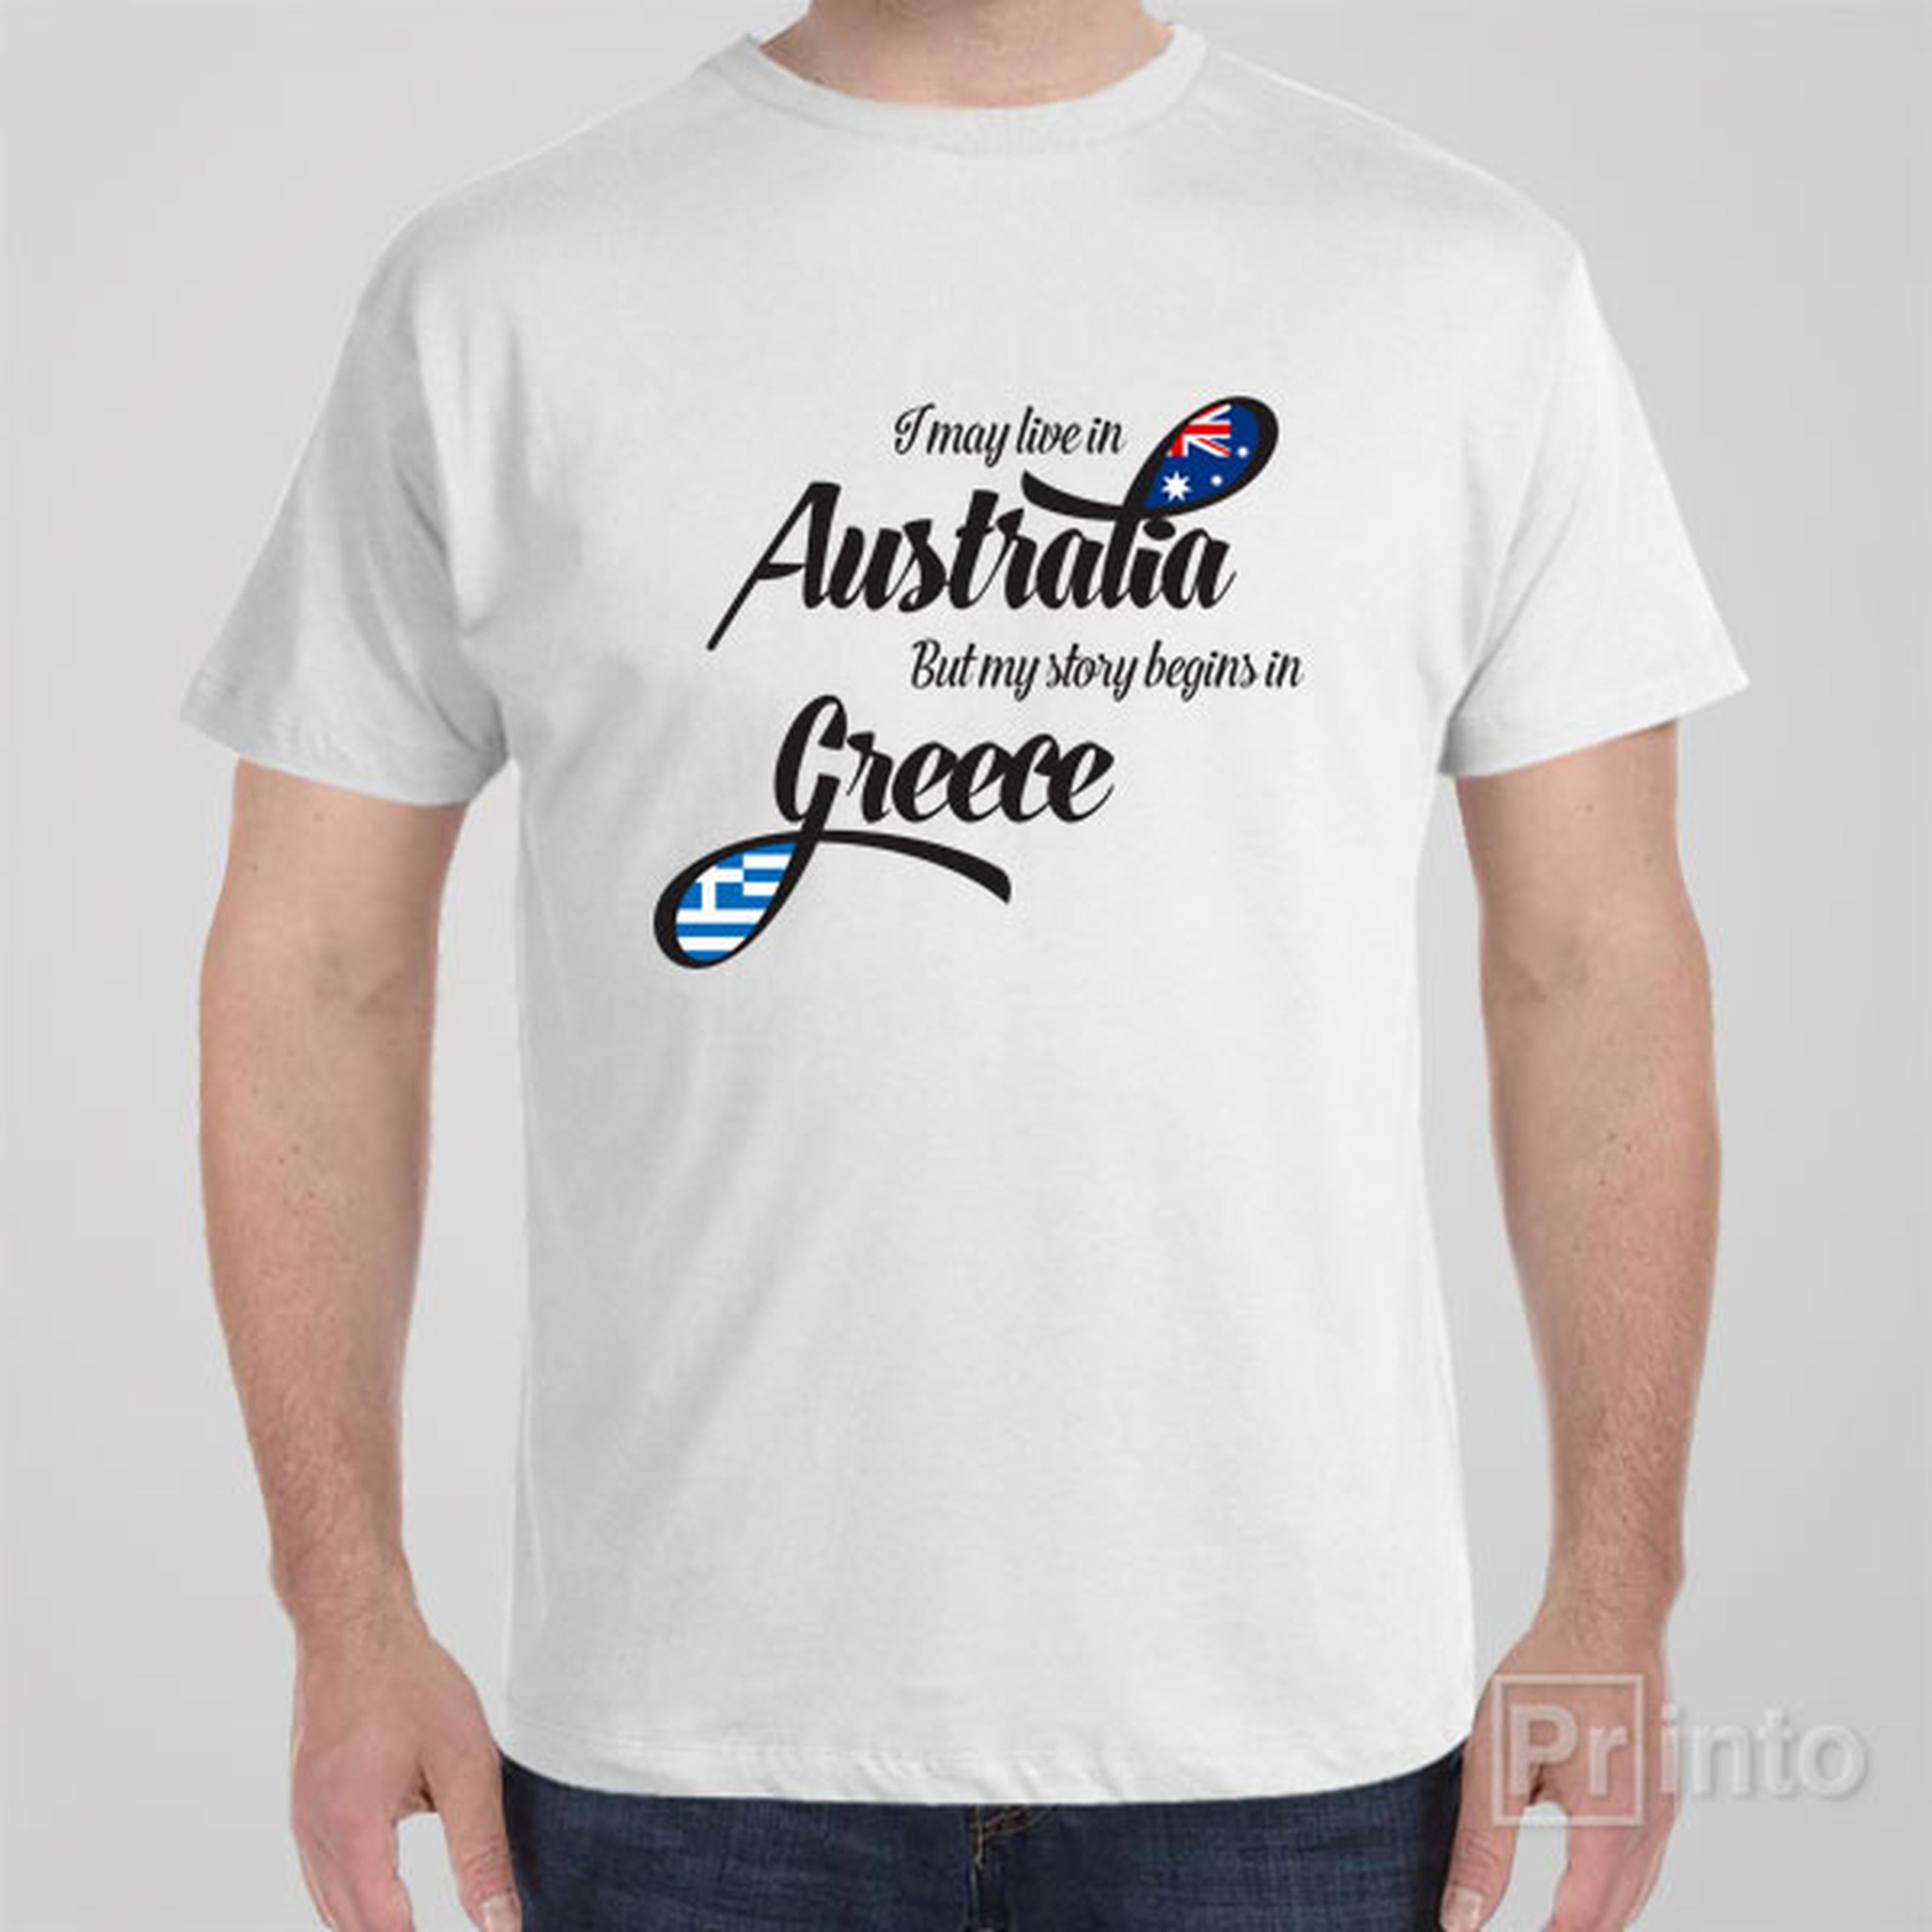 i-may-live-in-australia-but-my-story-begins-in-greece-t-shirt